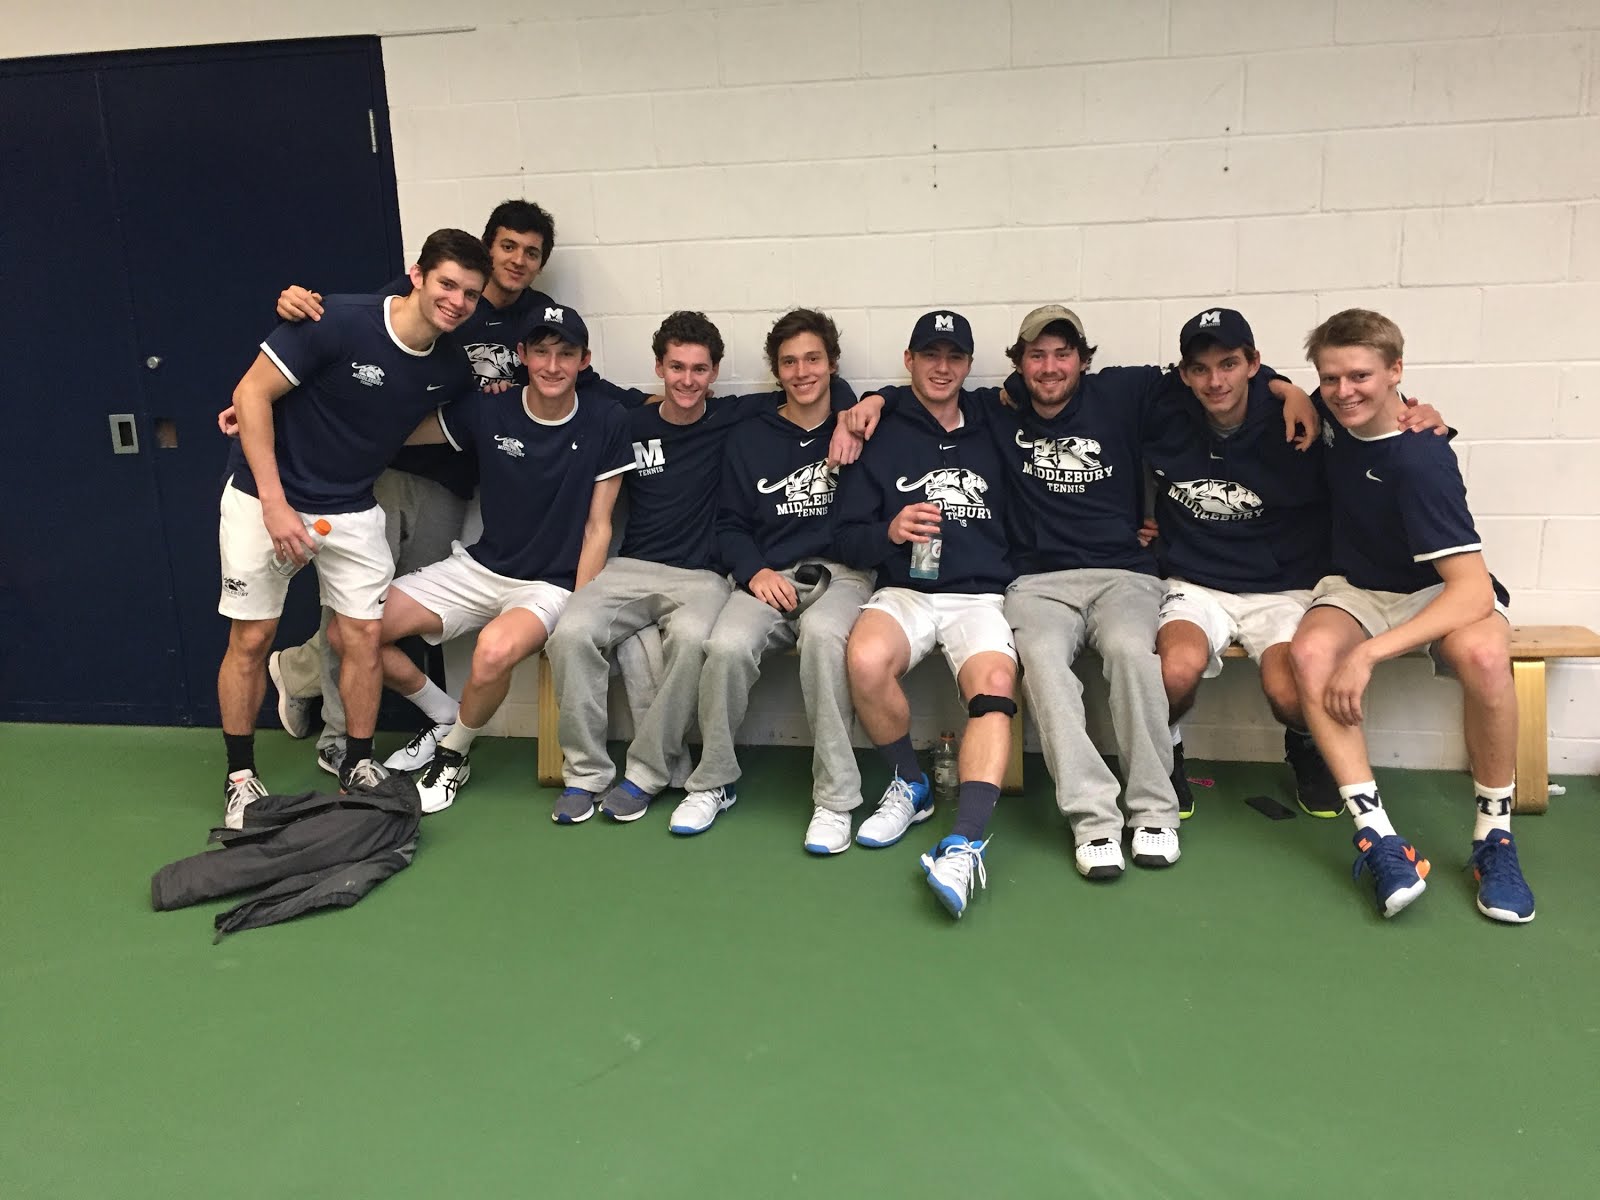 Midd Tennis Nation 8-1 Victory over Bates College